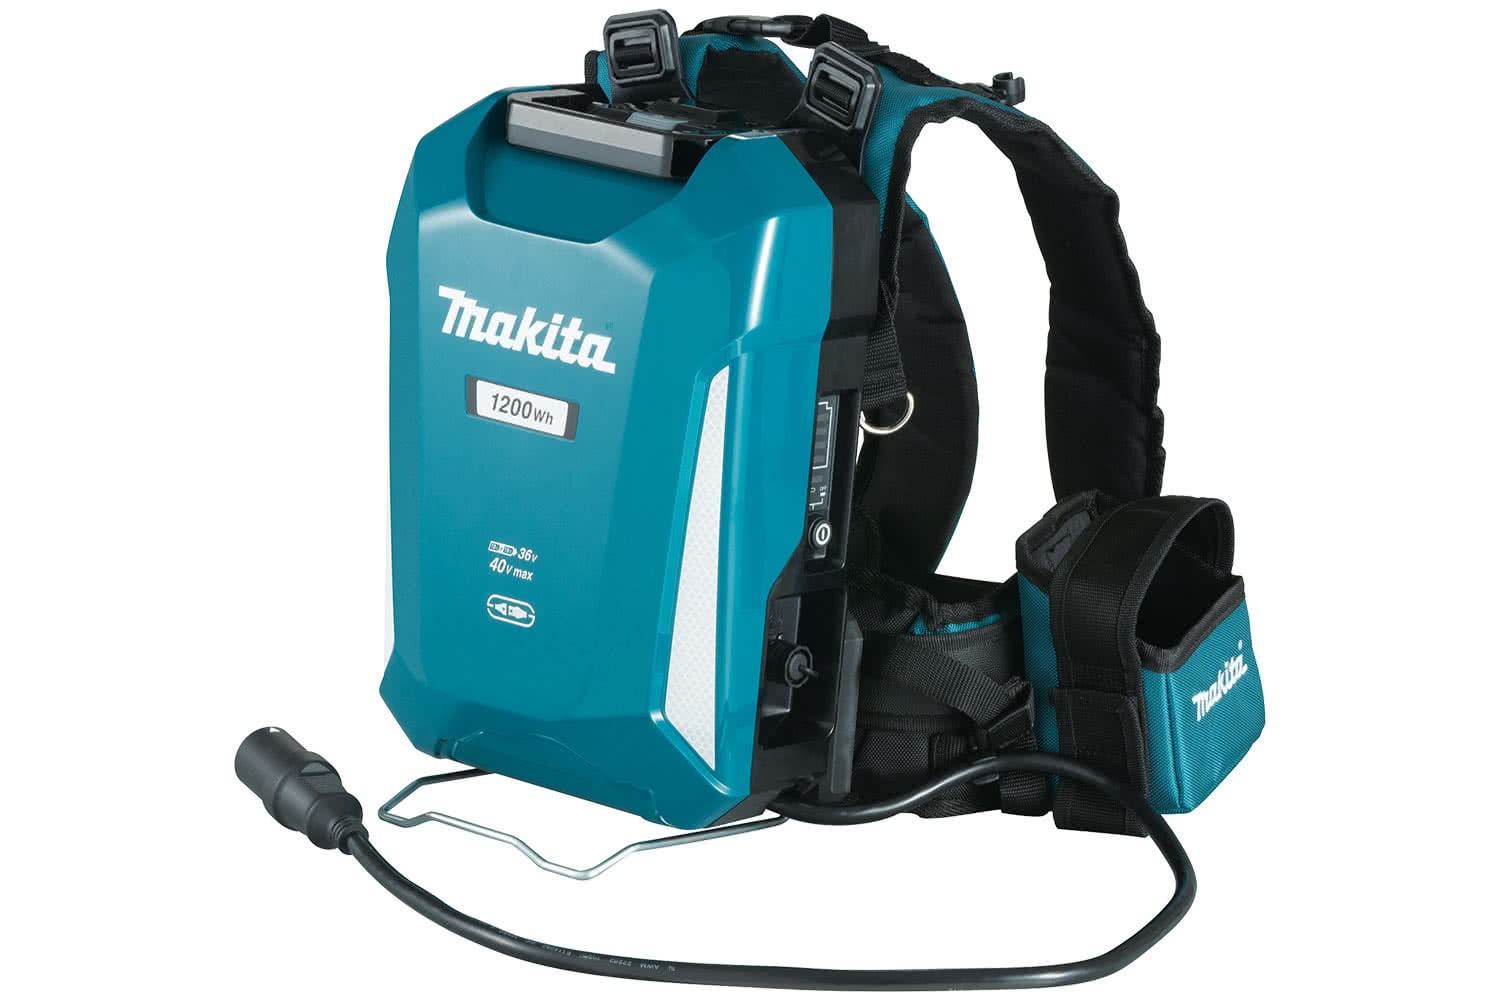 Makita - Product Details - PDC1200A01 ConnectX Portable Backpack ...